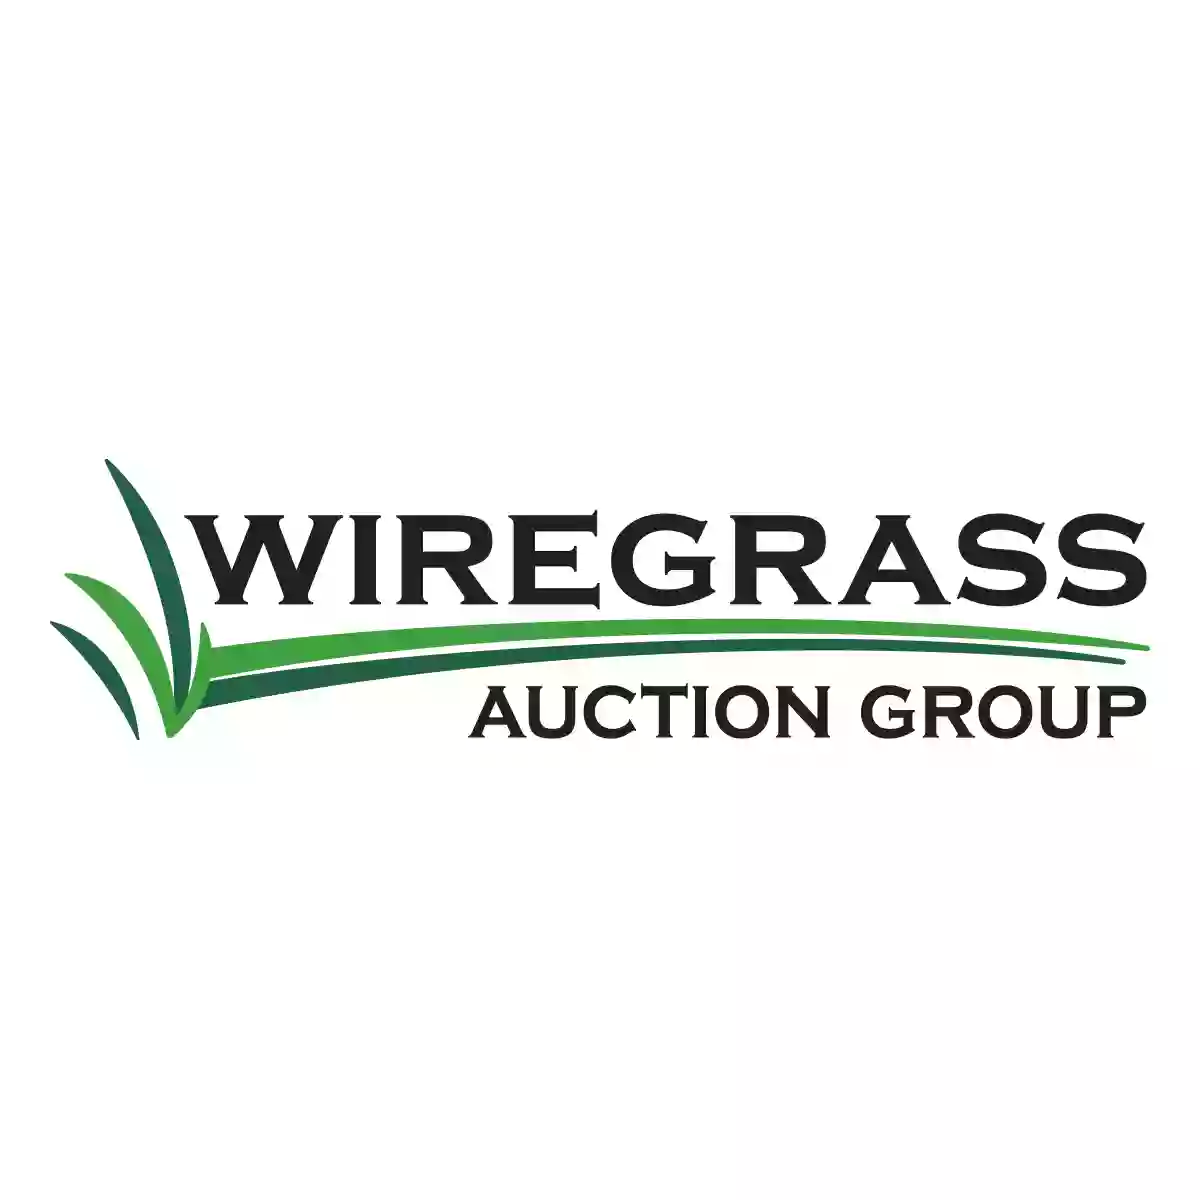 Wiregrass Auction Group, Inc